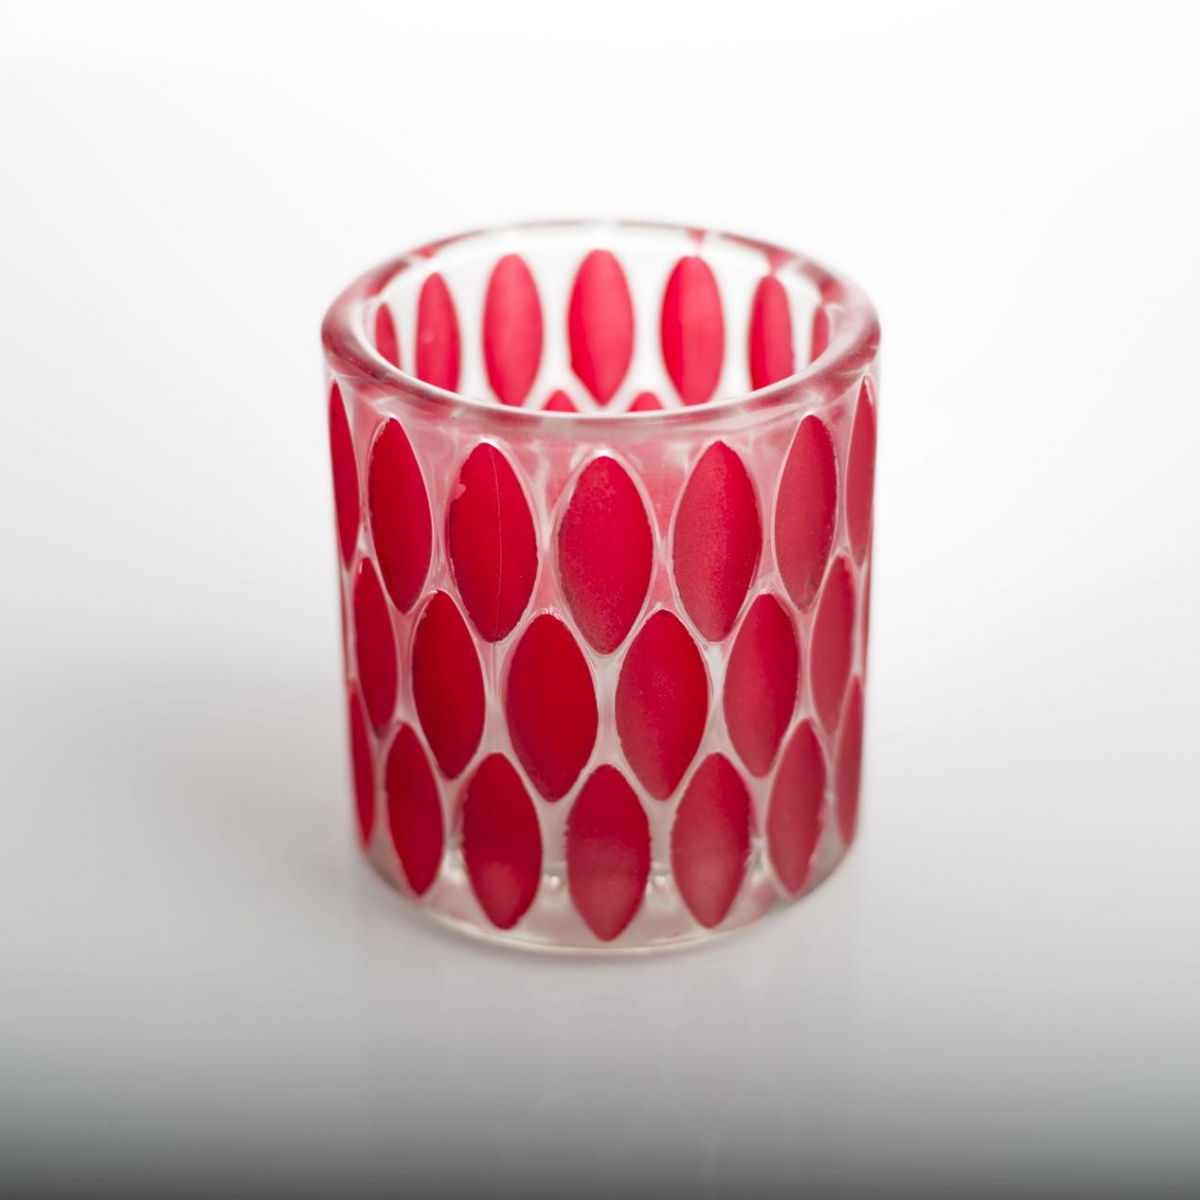 Candle Holder :Polish Glass ,Red Geometric Leaf ,Embossing Glass ,Spring ,Home Decoration ,China Factory ,Wholesale Price-HOWCANDLE-Candles,Scented Candles,Aromatherapy Candles,Soy Candles,Vegan Candles,Jar Candles,Pillar Candles,Candle Gift Sets,Essential Oils,Reed Diffuser,Candle Holder,